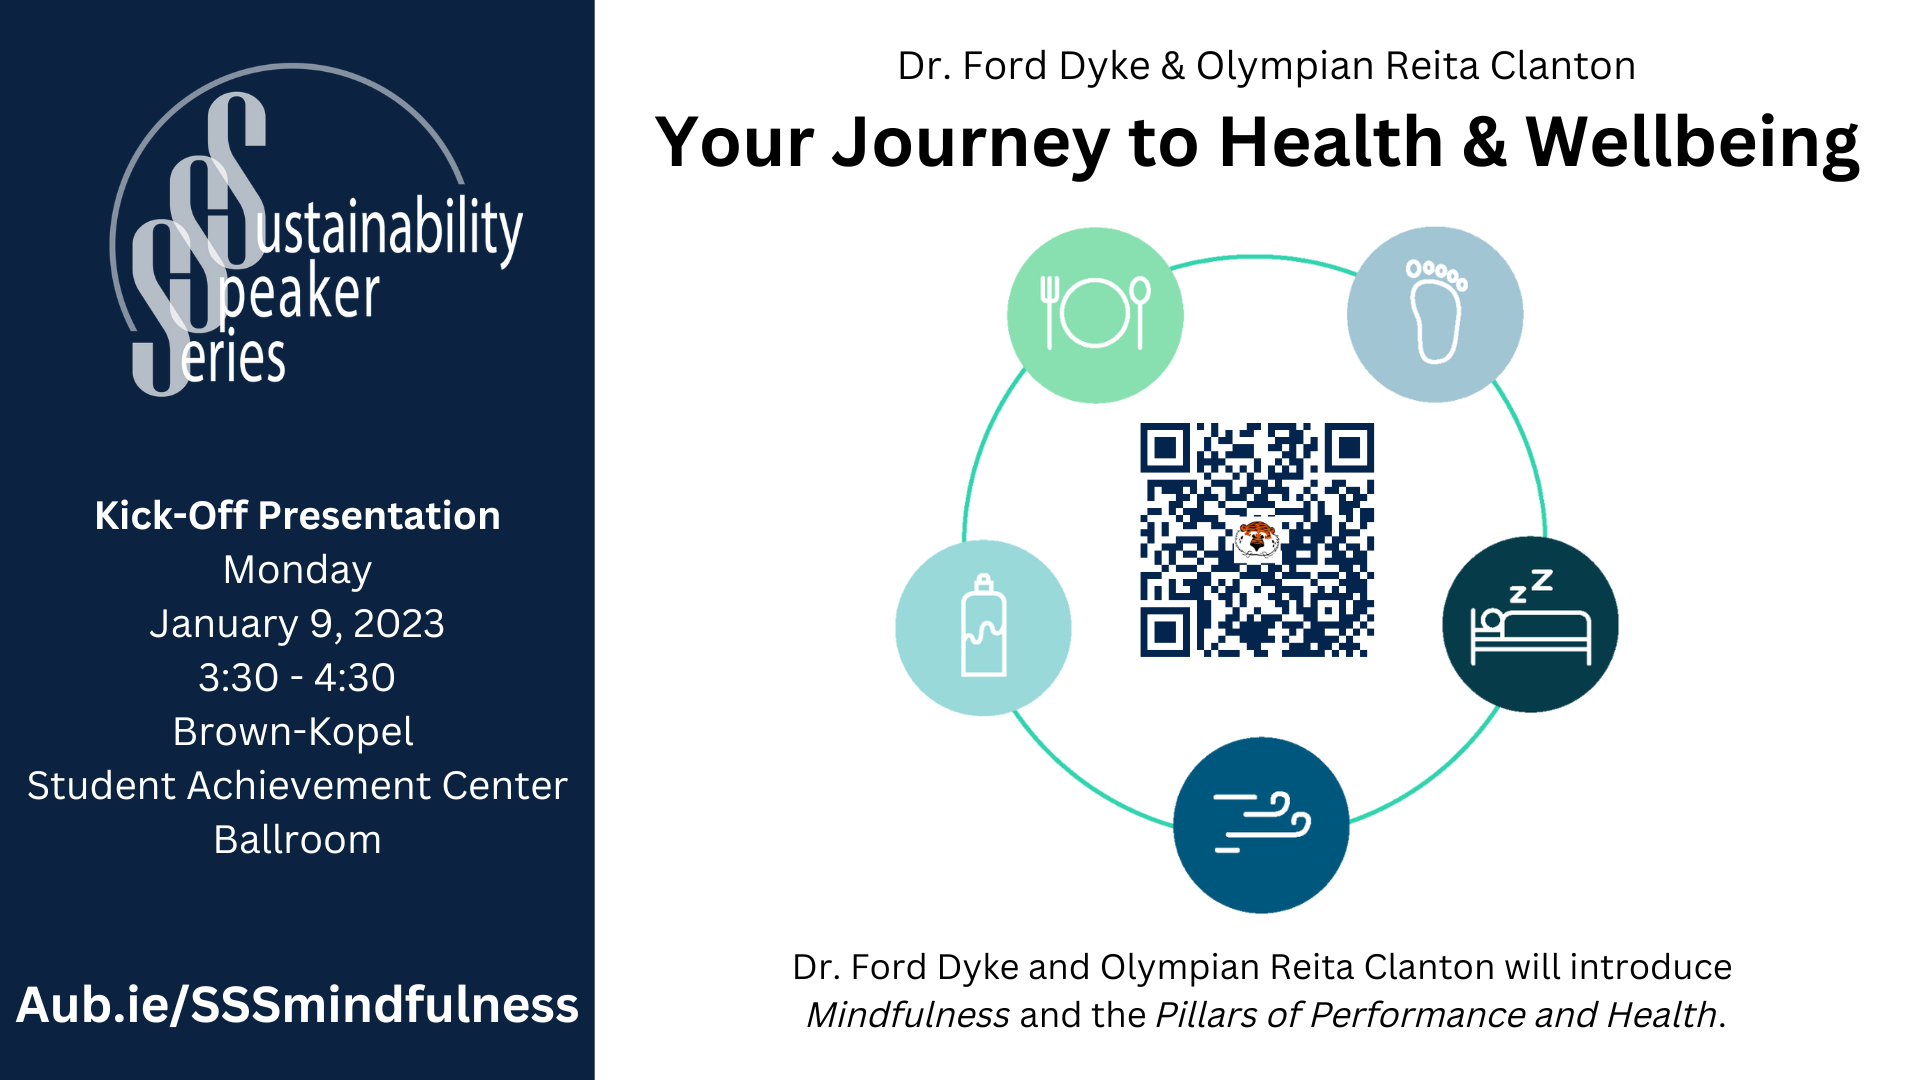 Presentation slide for Your Journey to Health & Wellbeing